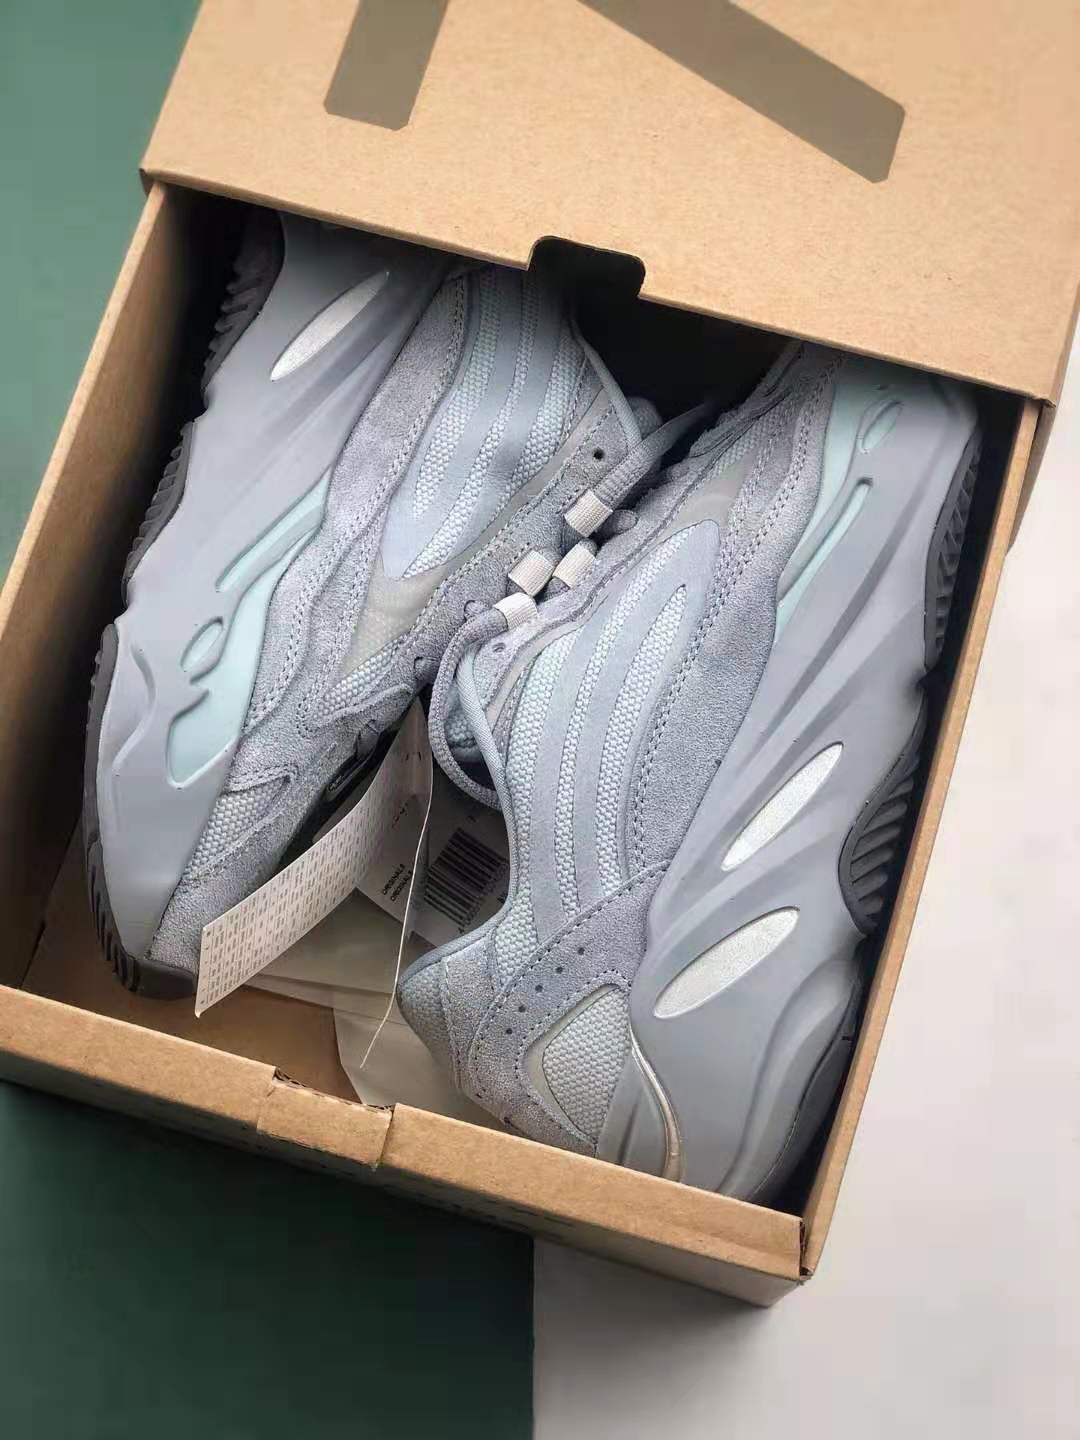 Adidas Yeezy Boost 700 V2 Hospital Blue FV8424 - Trendy Footwear for Style Savvy Individuals